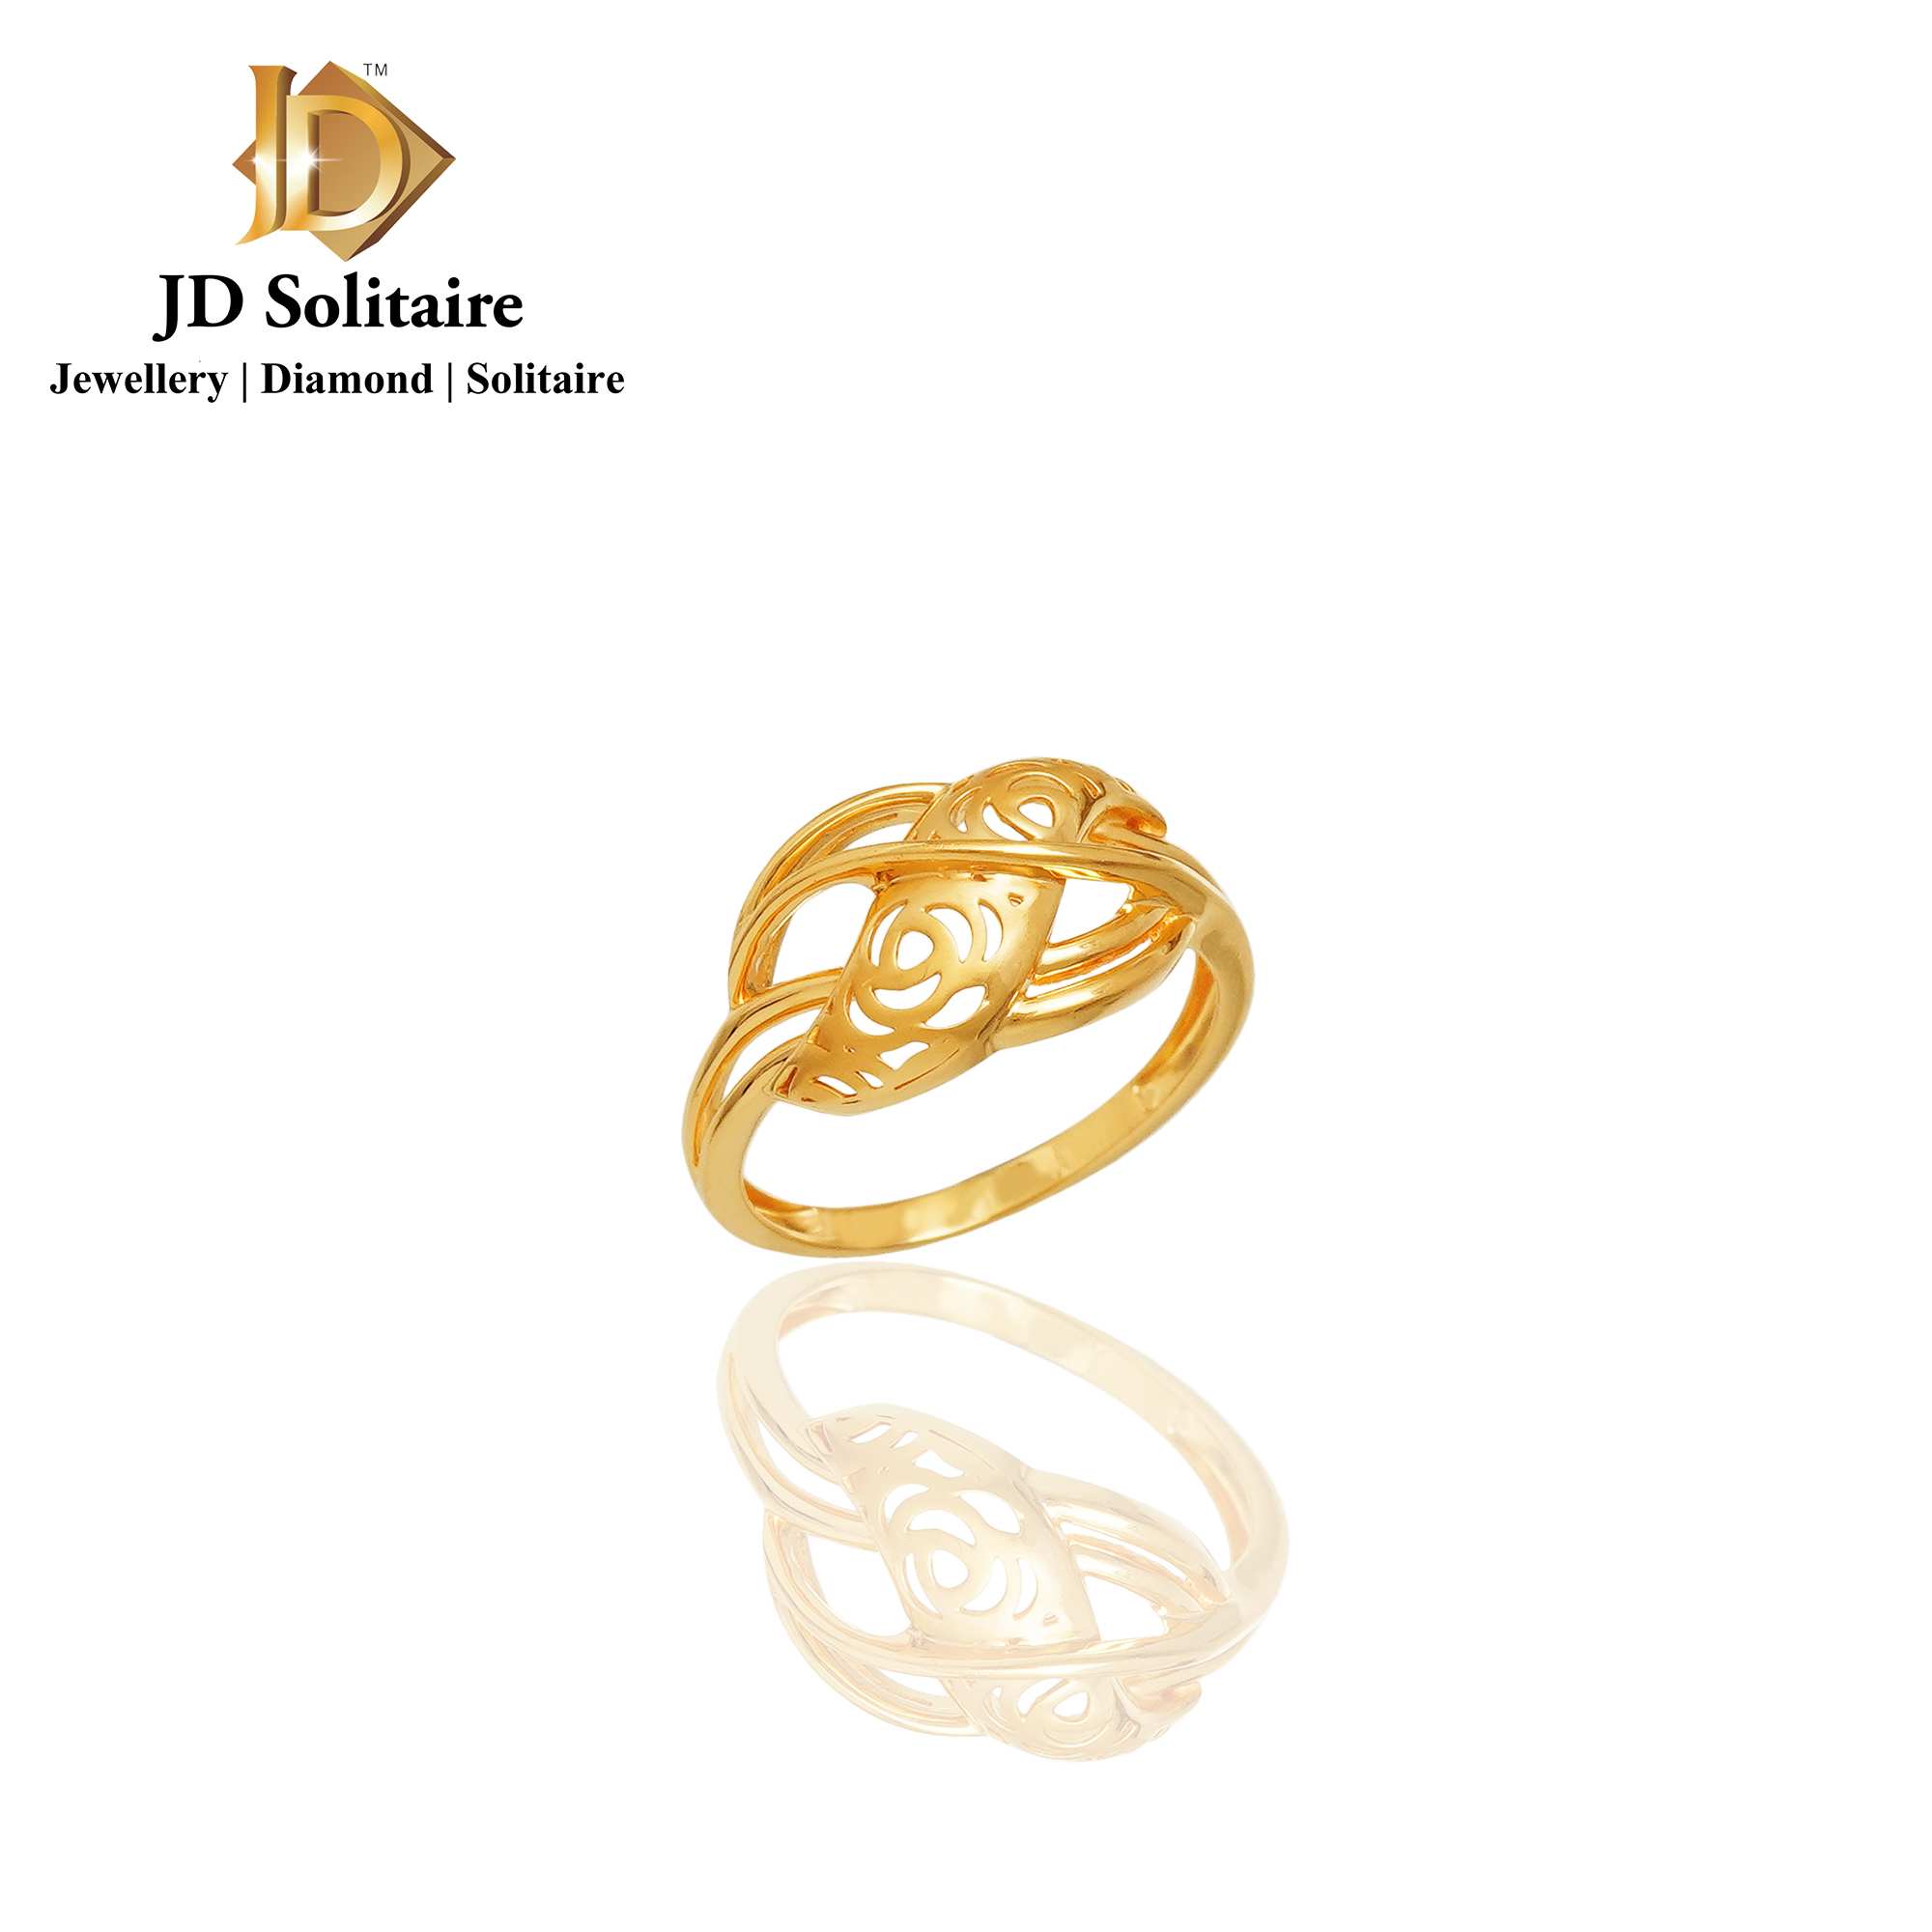 46 Daily Wear Gold Rings Designs For Women ideas | gold ring designs, ring  designs, gold rings